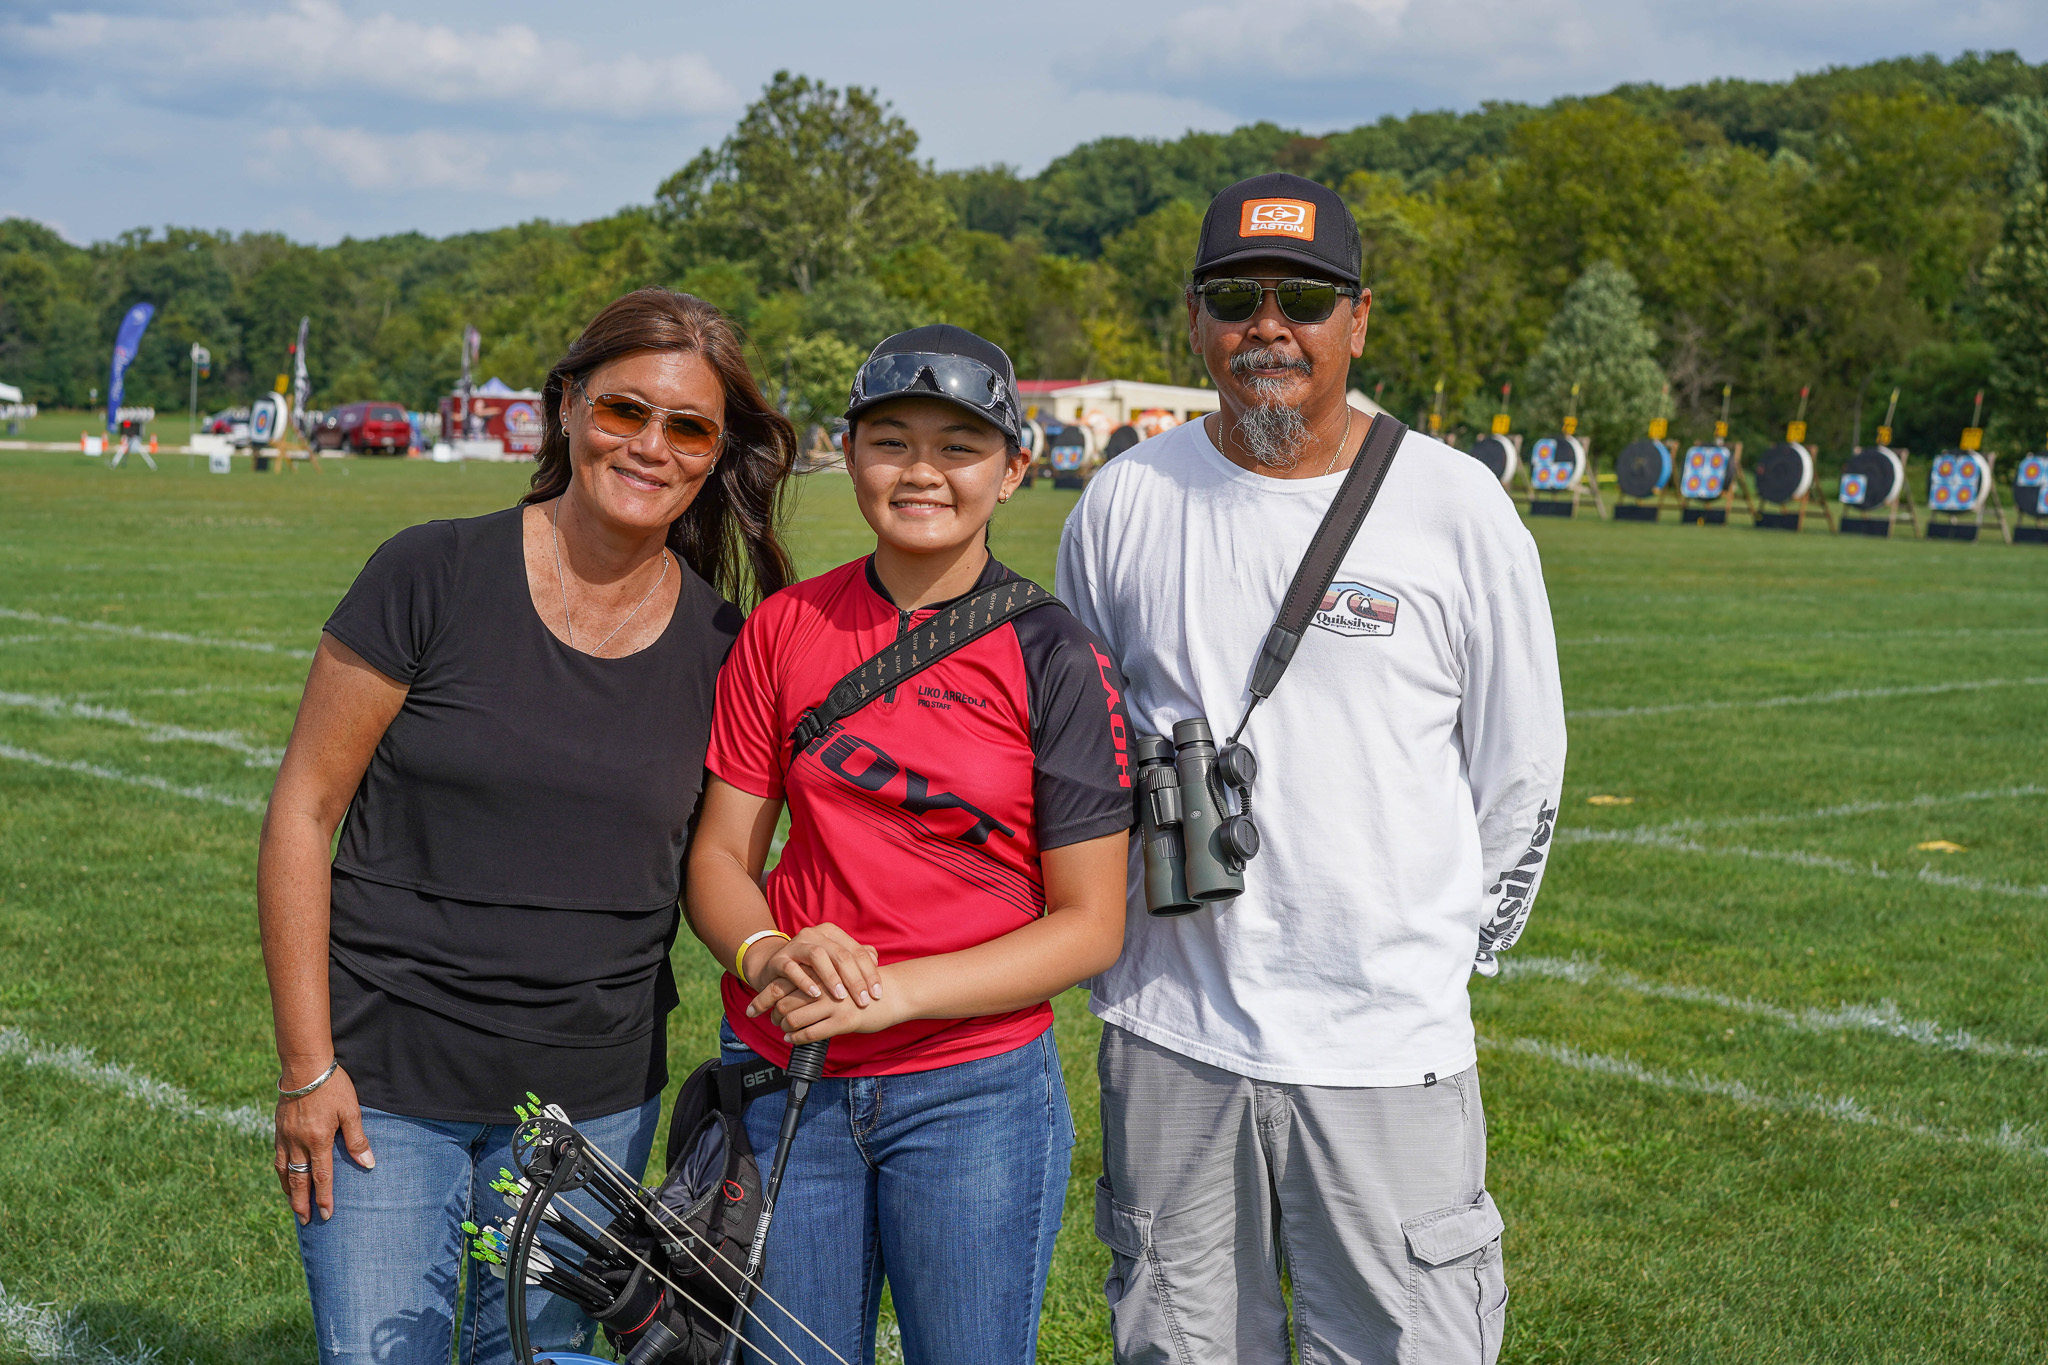 The Arreola family at the USA Archery Target Nationals.